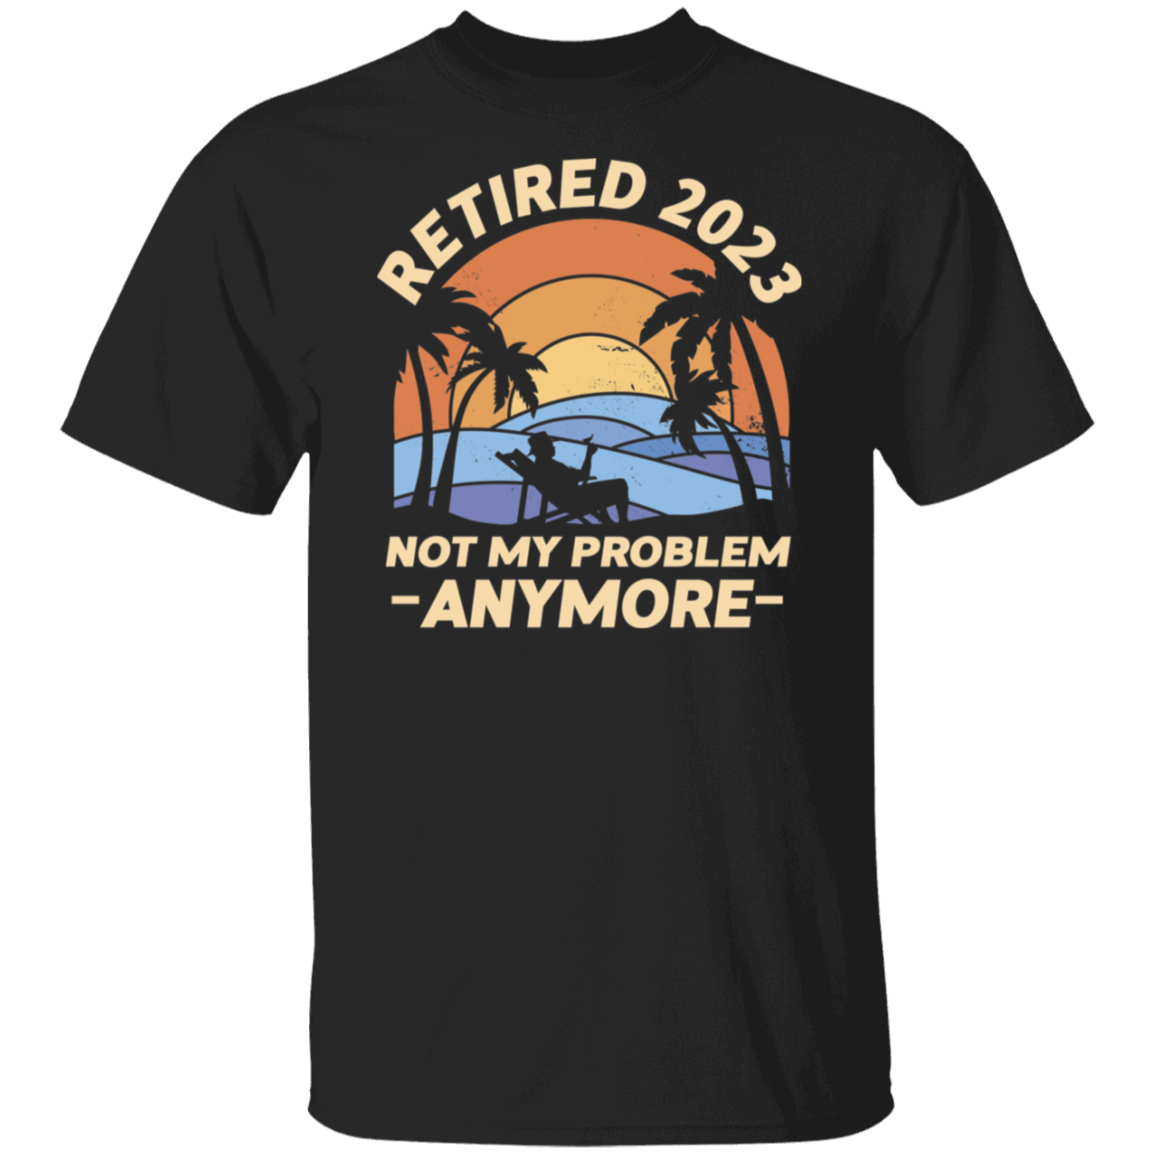 Retired 2023 Not My Problem T-Shirt